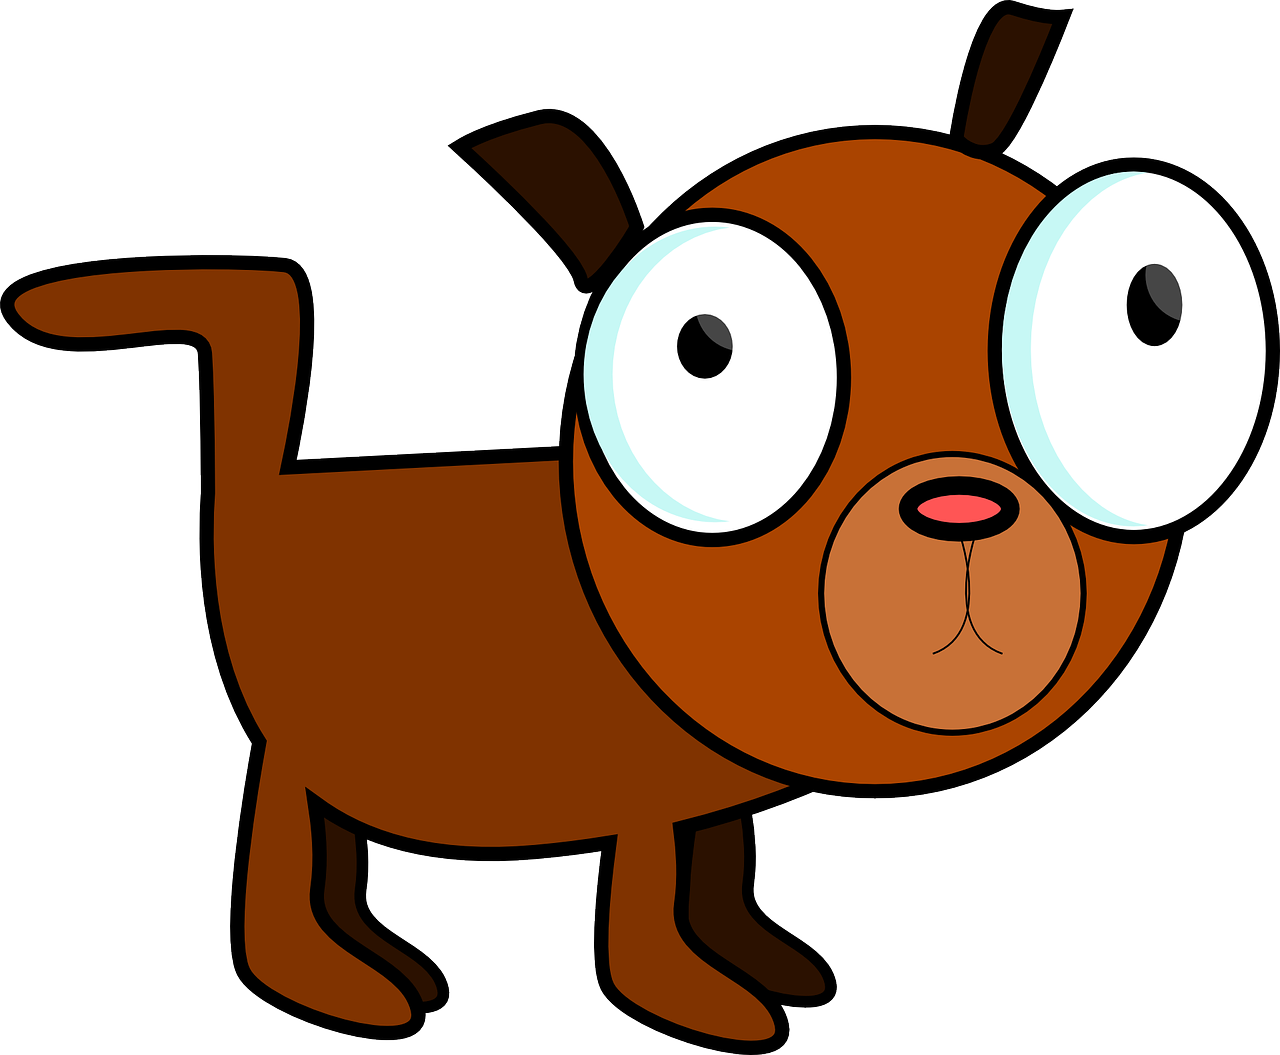 Download free photo of Dog,pet,animal,simple,cartoon - from 